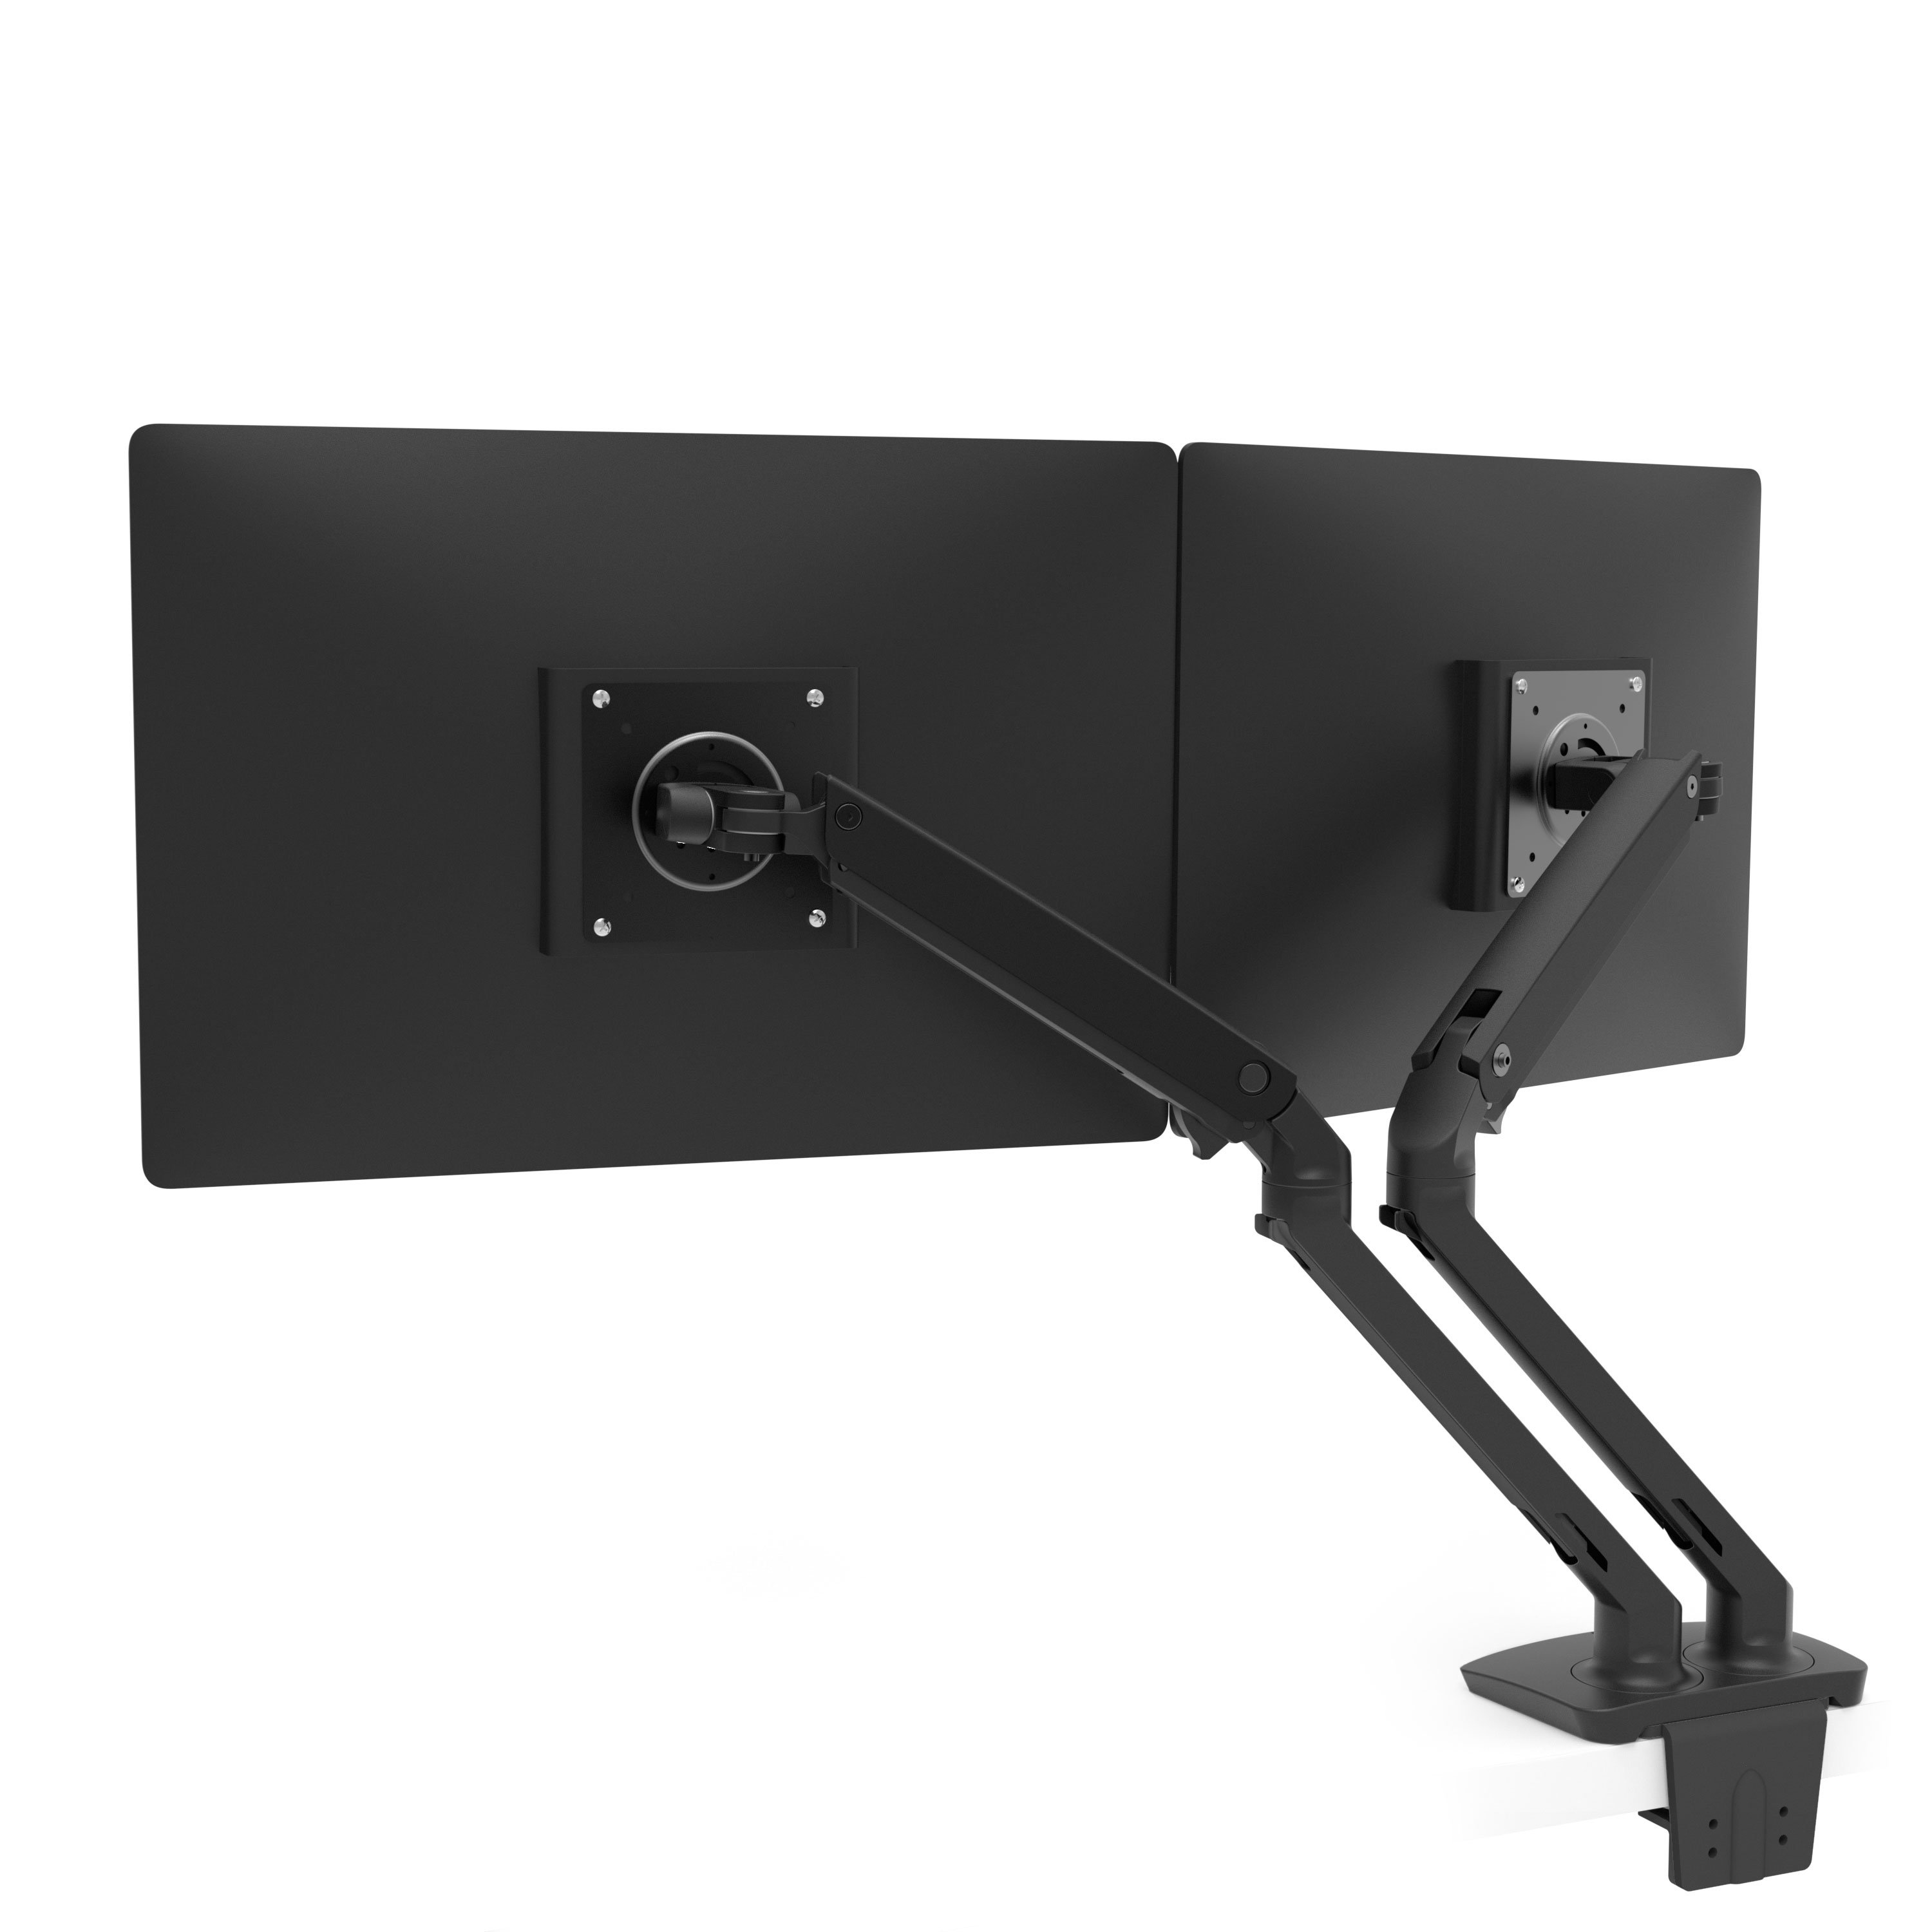 All-in-one Computer Ergotron Mounting Arm For Flat Panel Display 46" Screen 